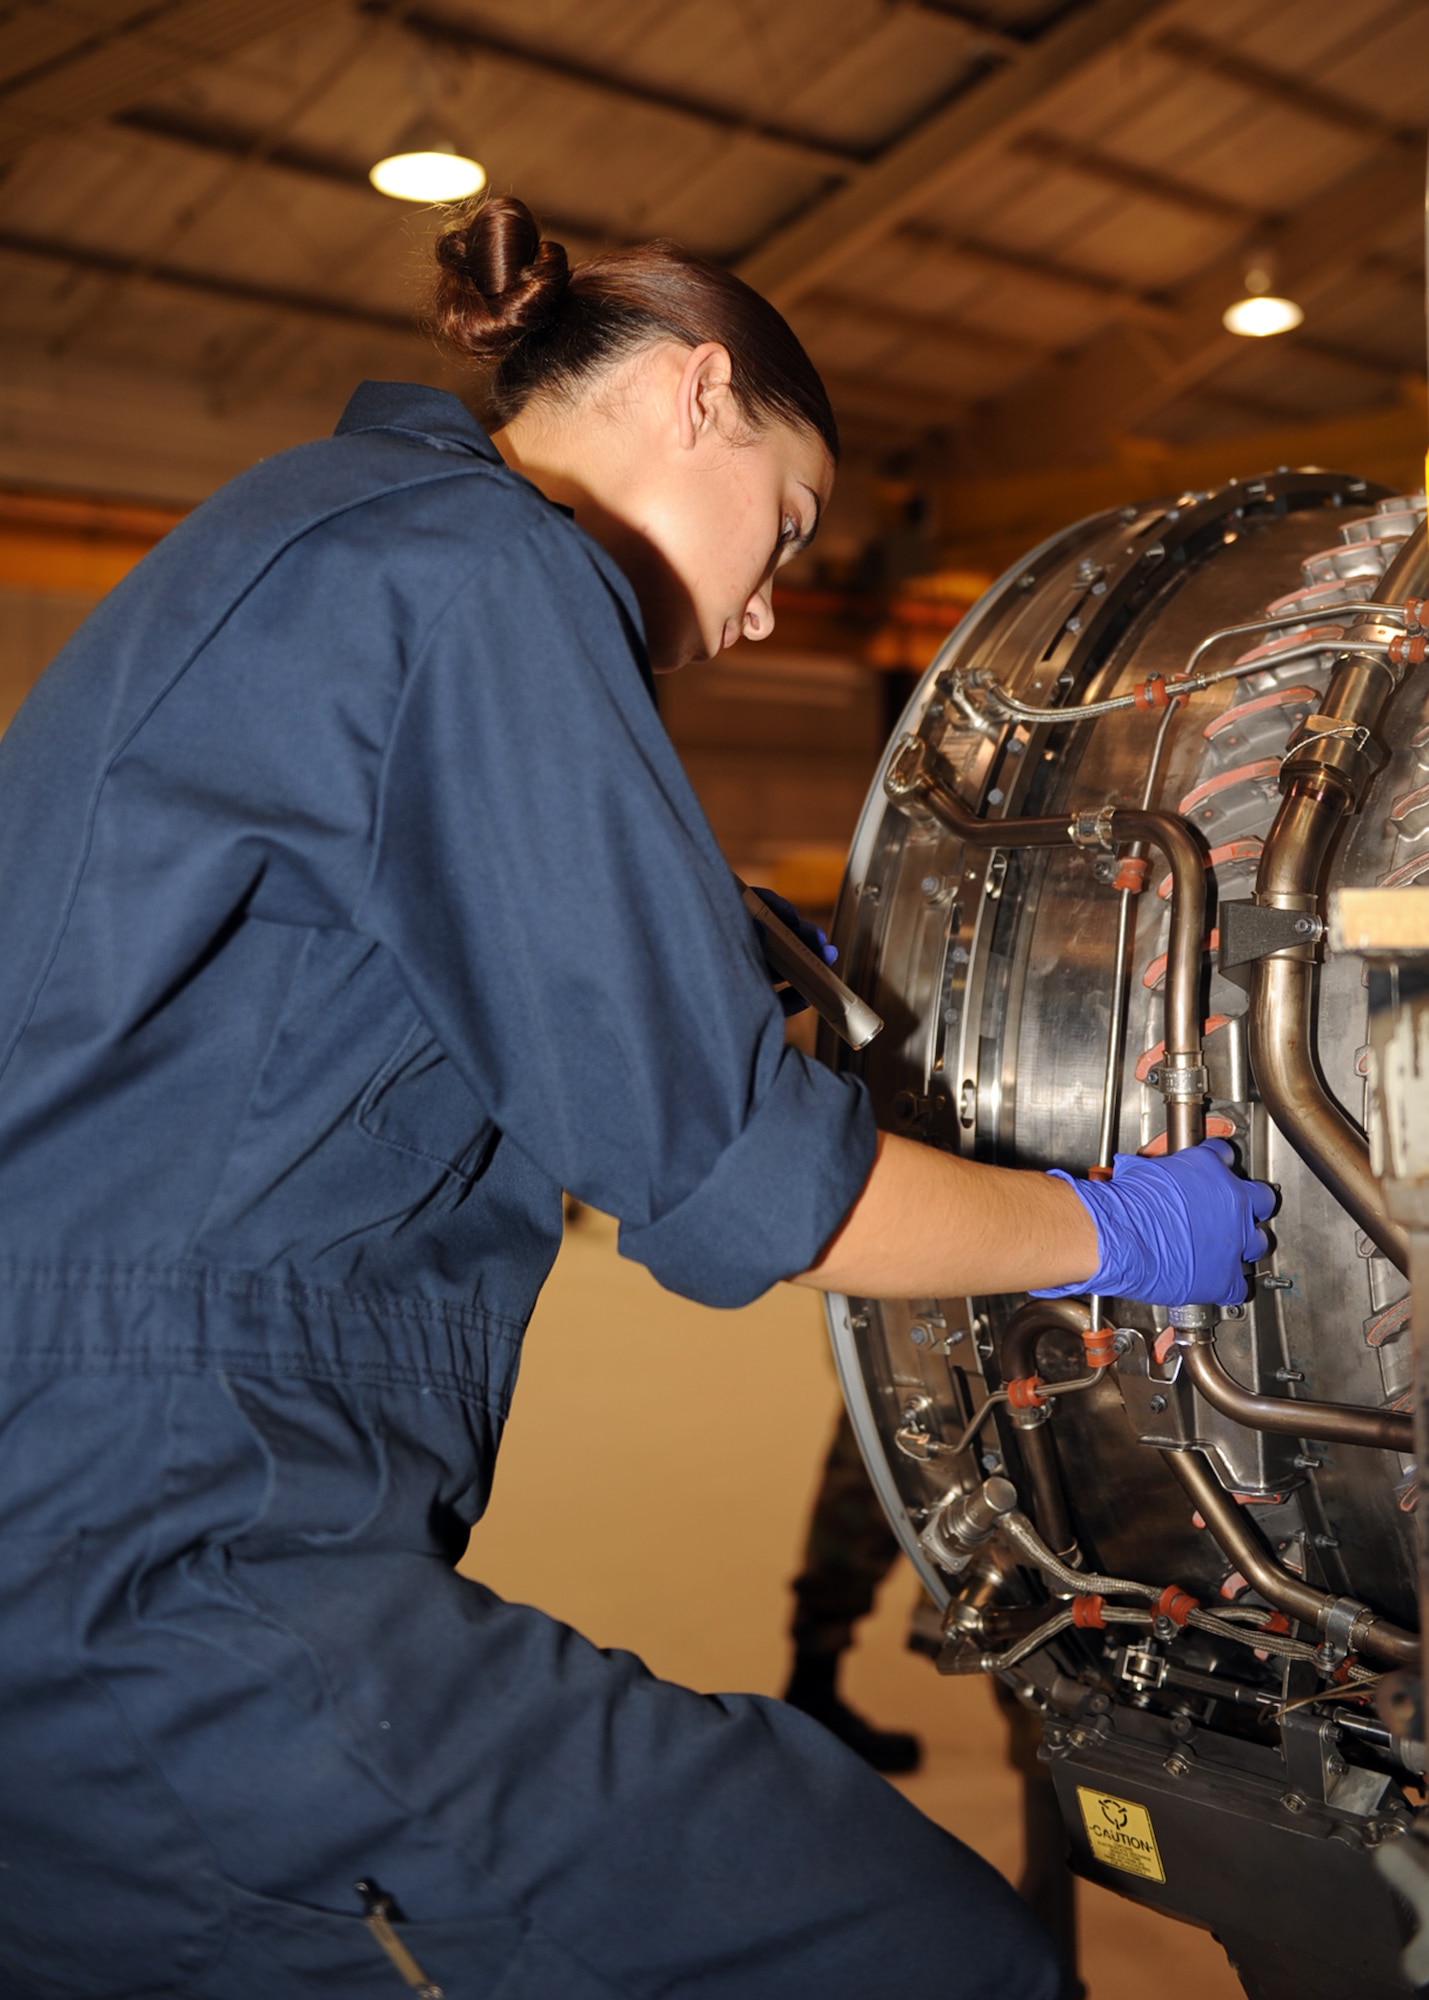 Airman 1st Class Laurel Smith, 4th Component Maintenance Squadron aerospace propulsion apprentice, performs an inspection on an engine to clear a five-level write up on Seymour Johnson Air Force Base, N.C., Sept. 14, 2009. The 4th Component Maintenance Squadron produces more than 130 engines per year and maintains more than 250 between Seymour Johnson and Langley Air Force bases. (U.S. Air Force photo by Senior Airman Ciara Wymbs)